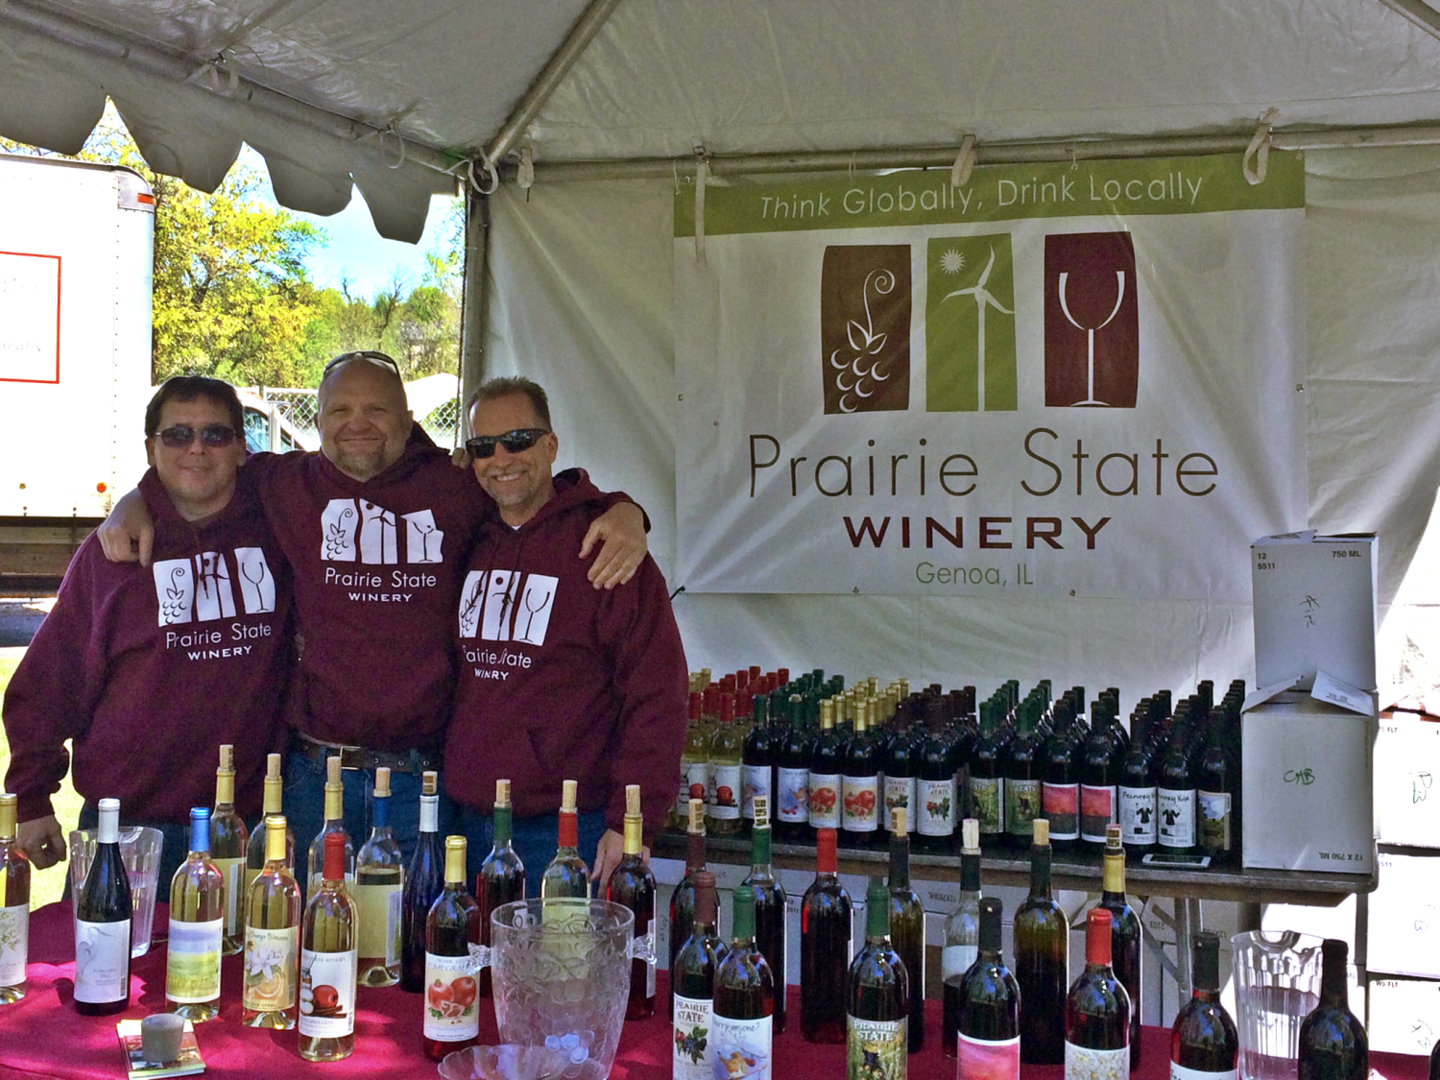 Prairie State Winery and best wineries near Chicago